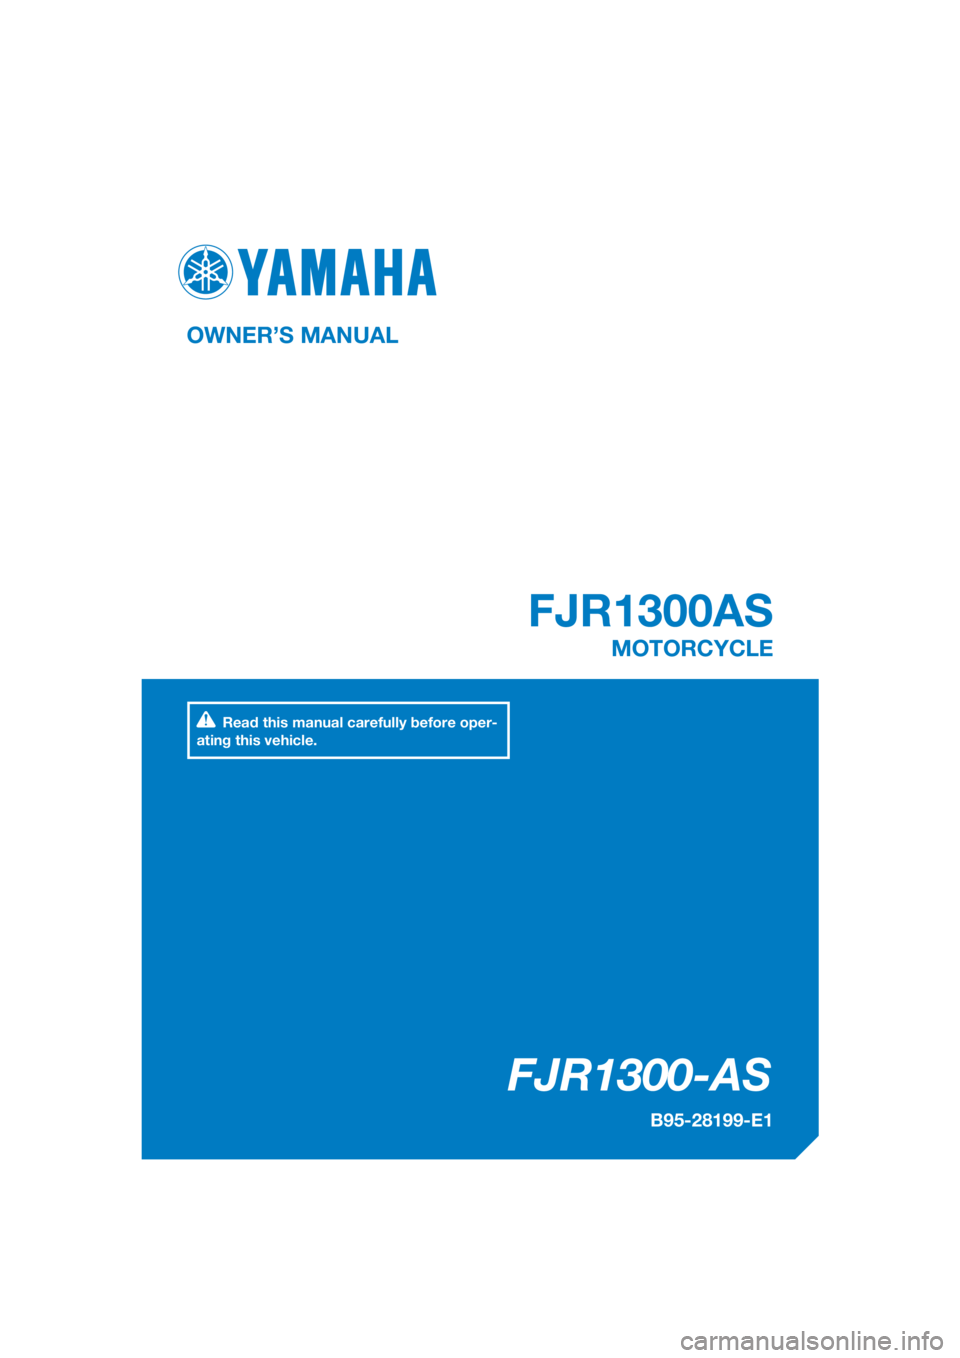 YAMAHA FJR1300AS 2018  Owners Manual DIC183
FJR1300-AS
FJR1300AS
OWNER’S MANUAL
B95-28199-E1
MOTORCYCLE
[English  (E)]
Read this manual carefully before oper-
ating this vehicle. 